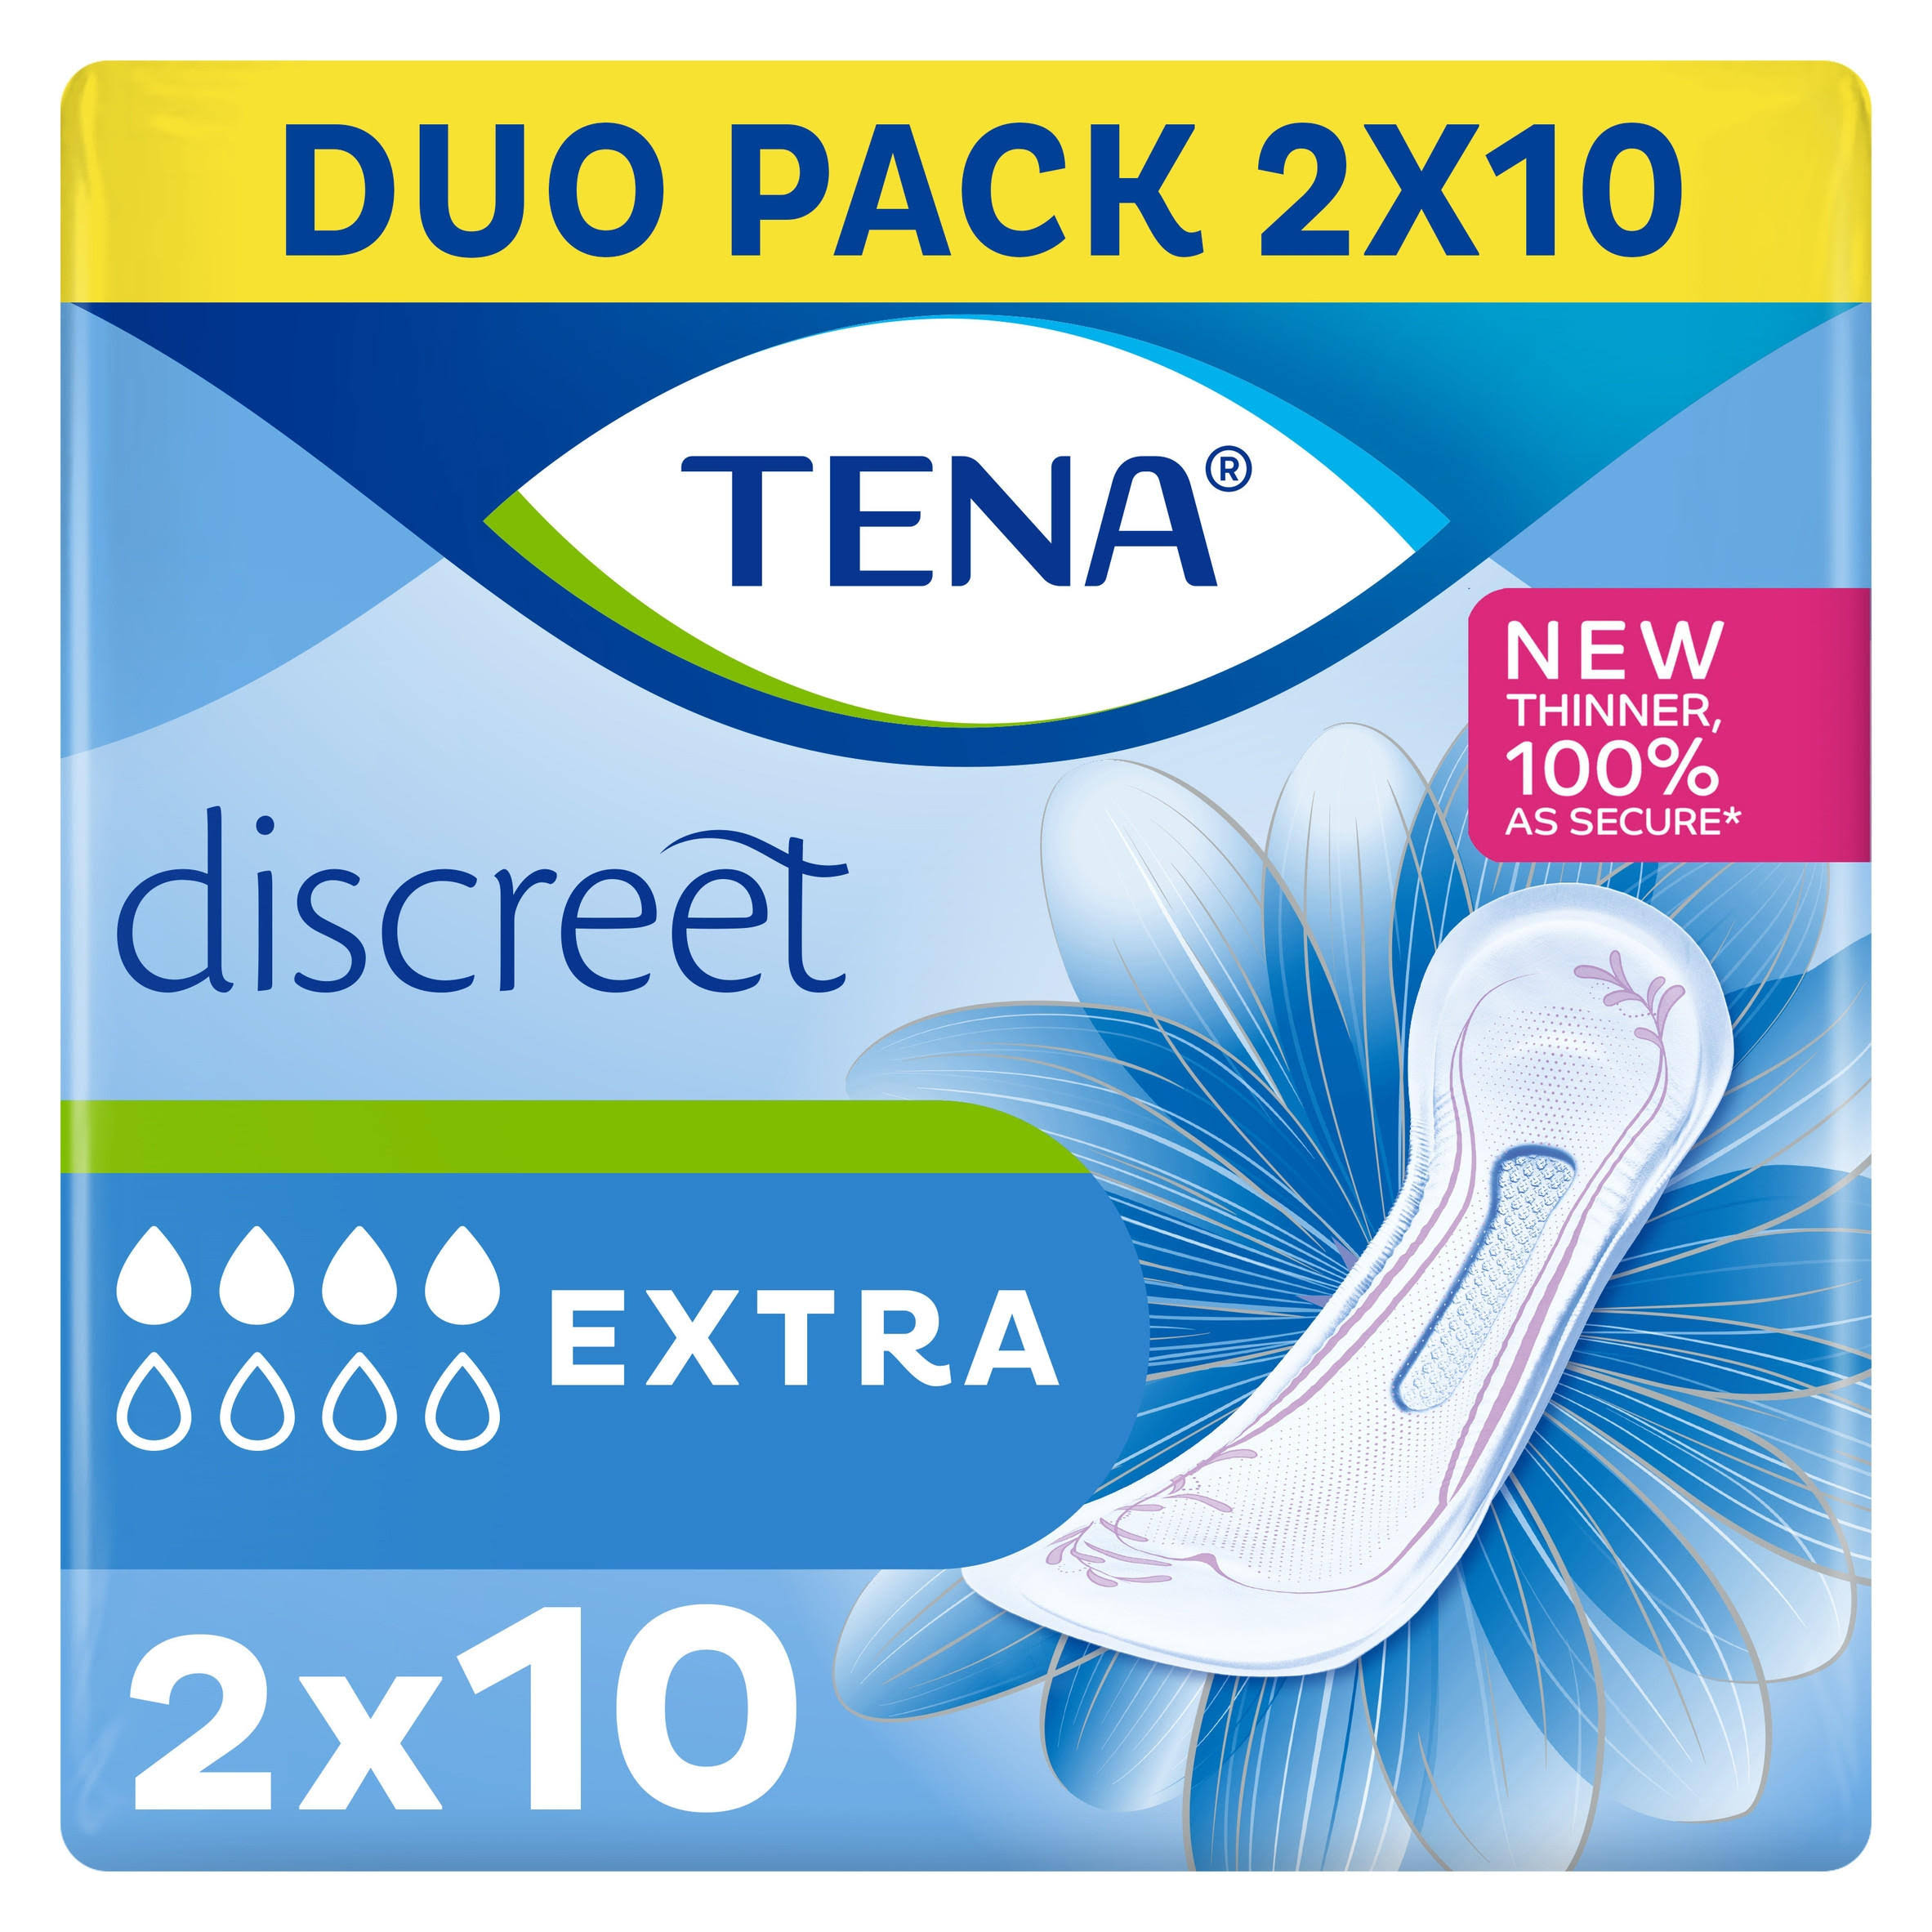 TENA Lady Discreet Extra Incontinence Pads